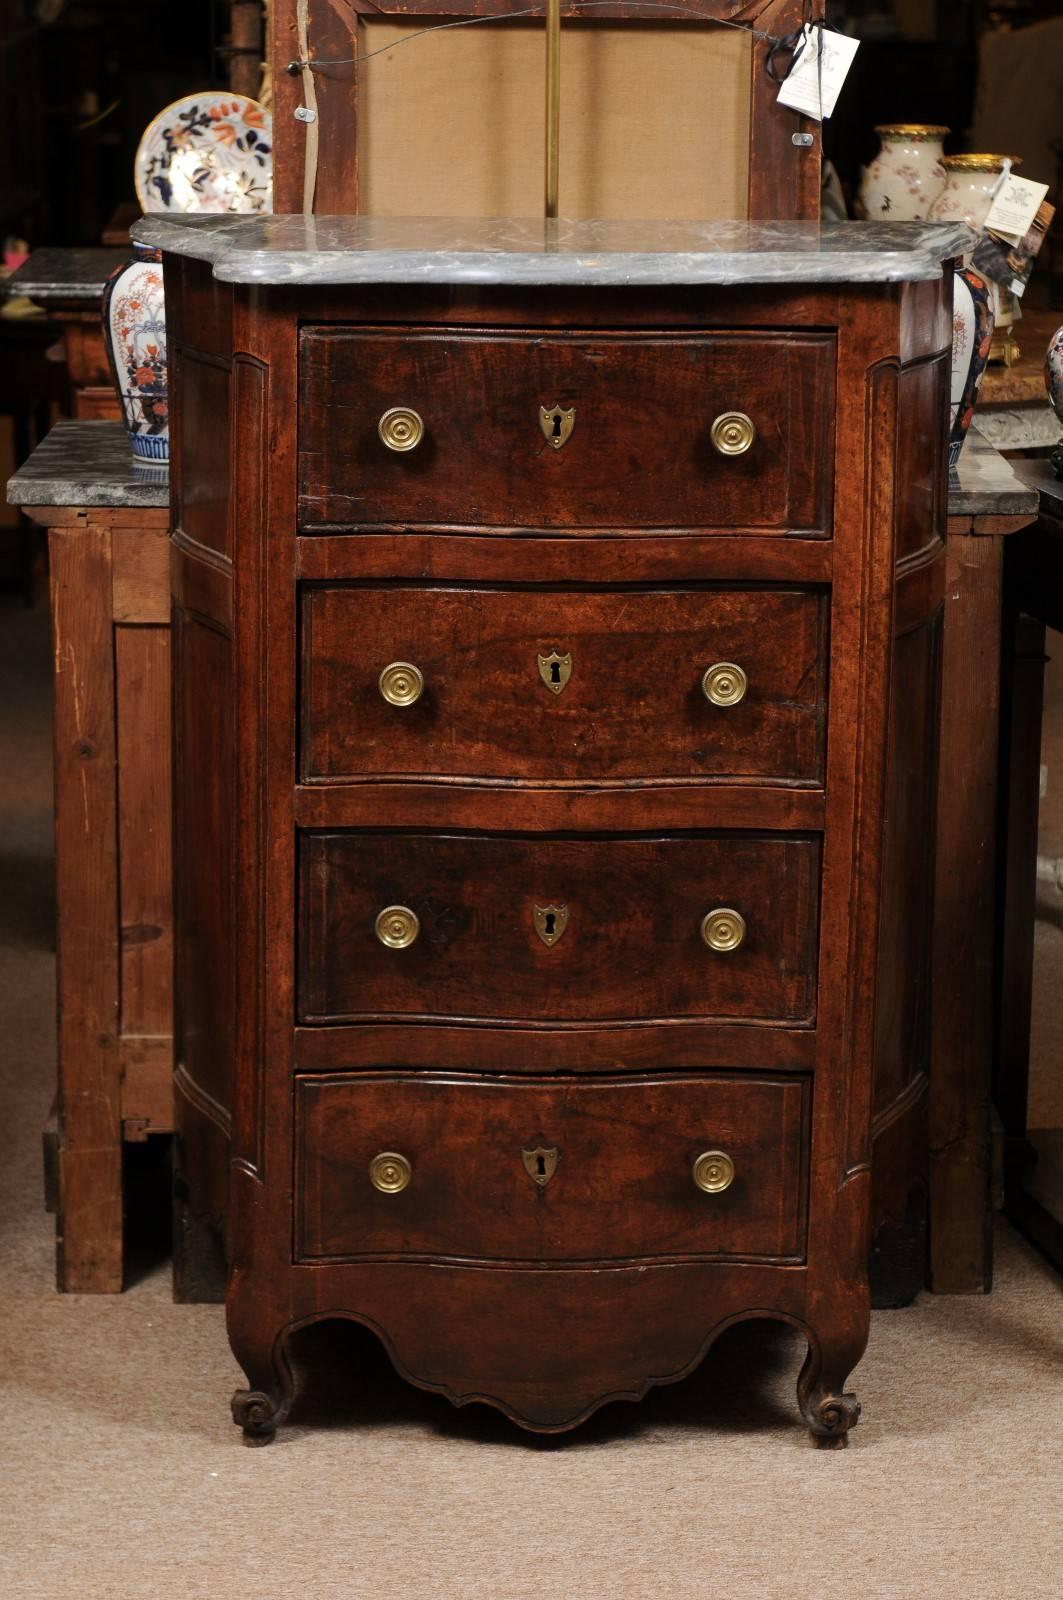 Louis XV period 4-drawer walnut tall commode with serpentine front, shaped apron, cabriole feet, and gray marble top.